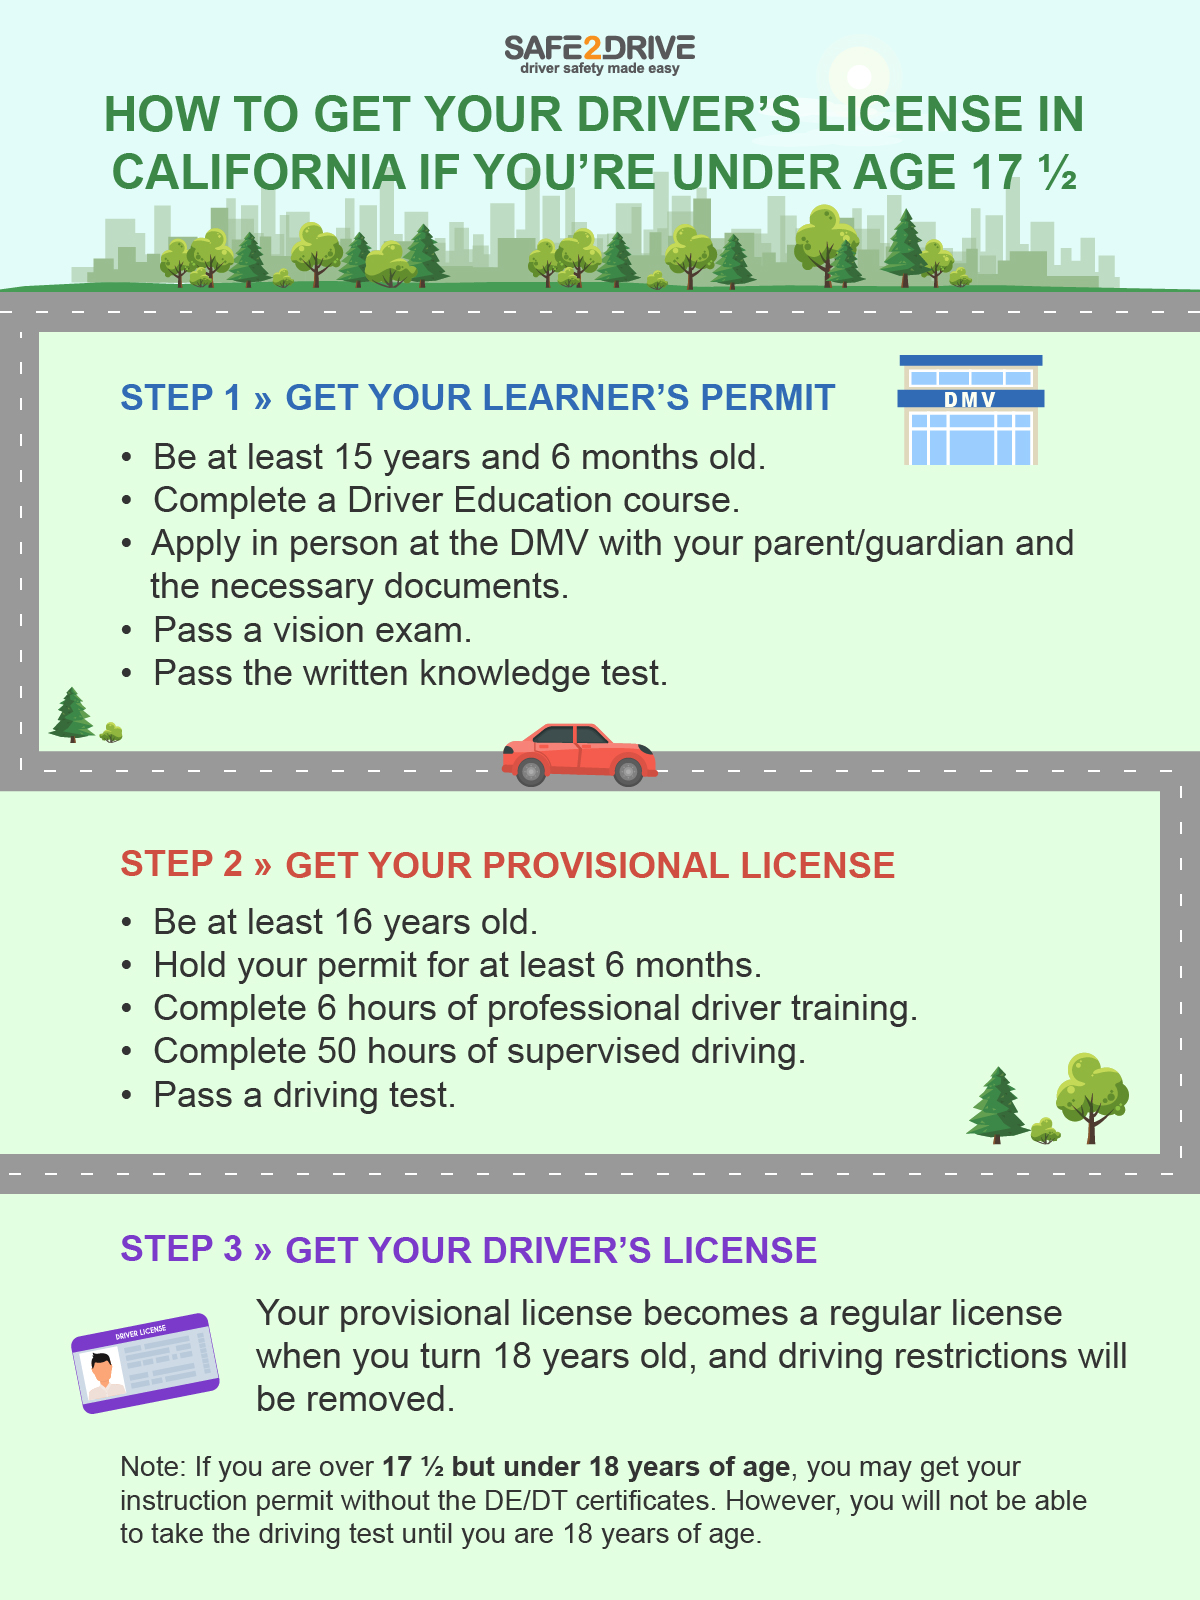 how-to-get-your-driver-license-in-california